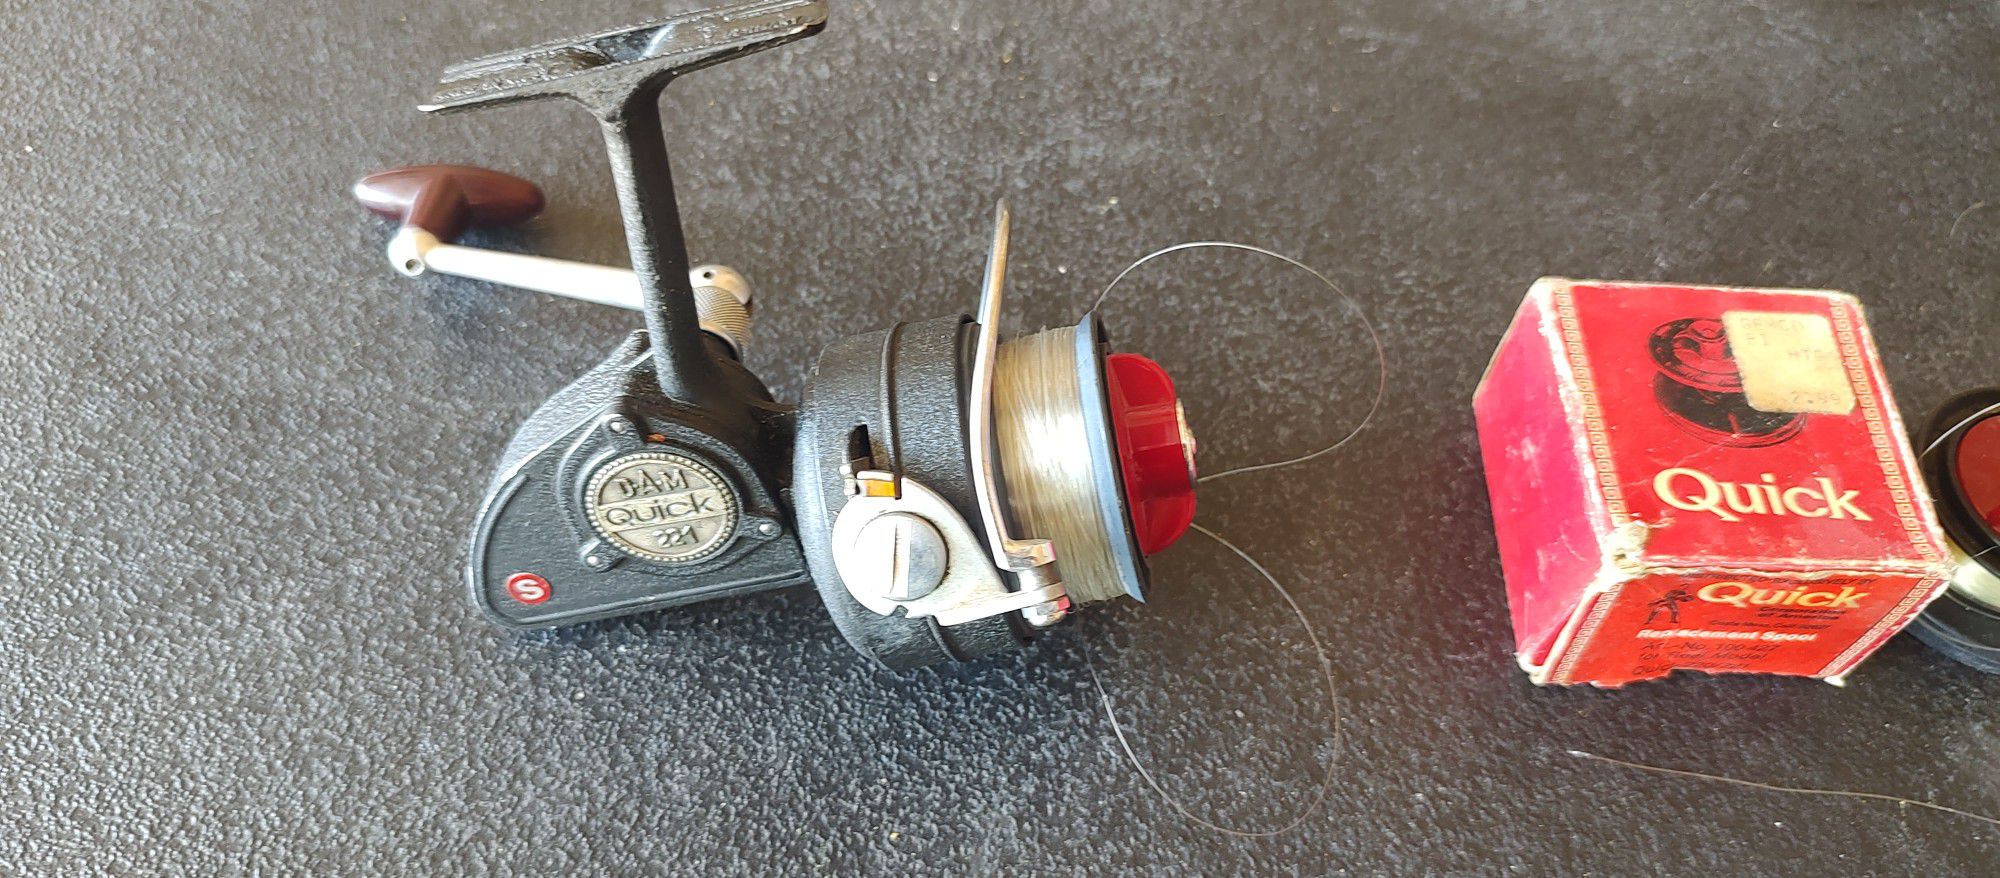 Dam Quick Fishing Reel Model #221 And 2 Replacement Spools